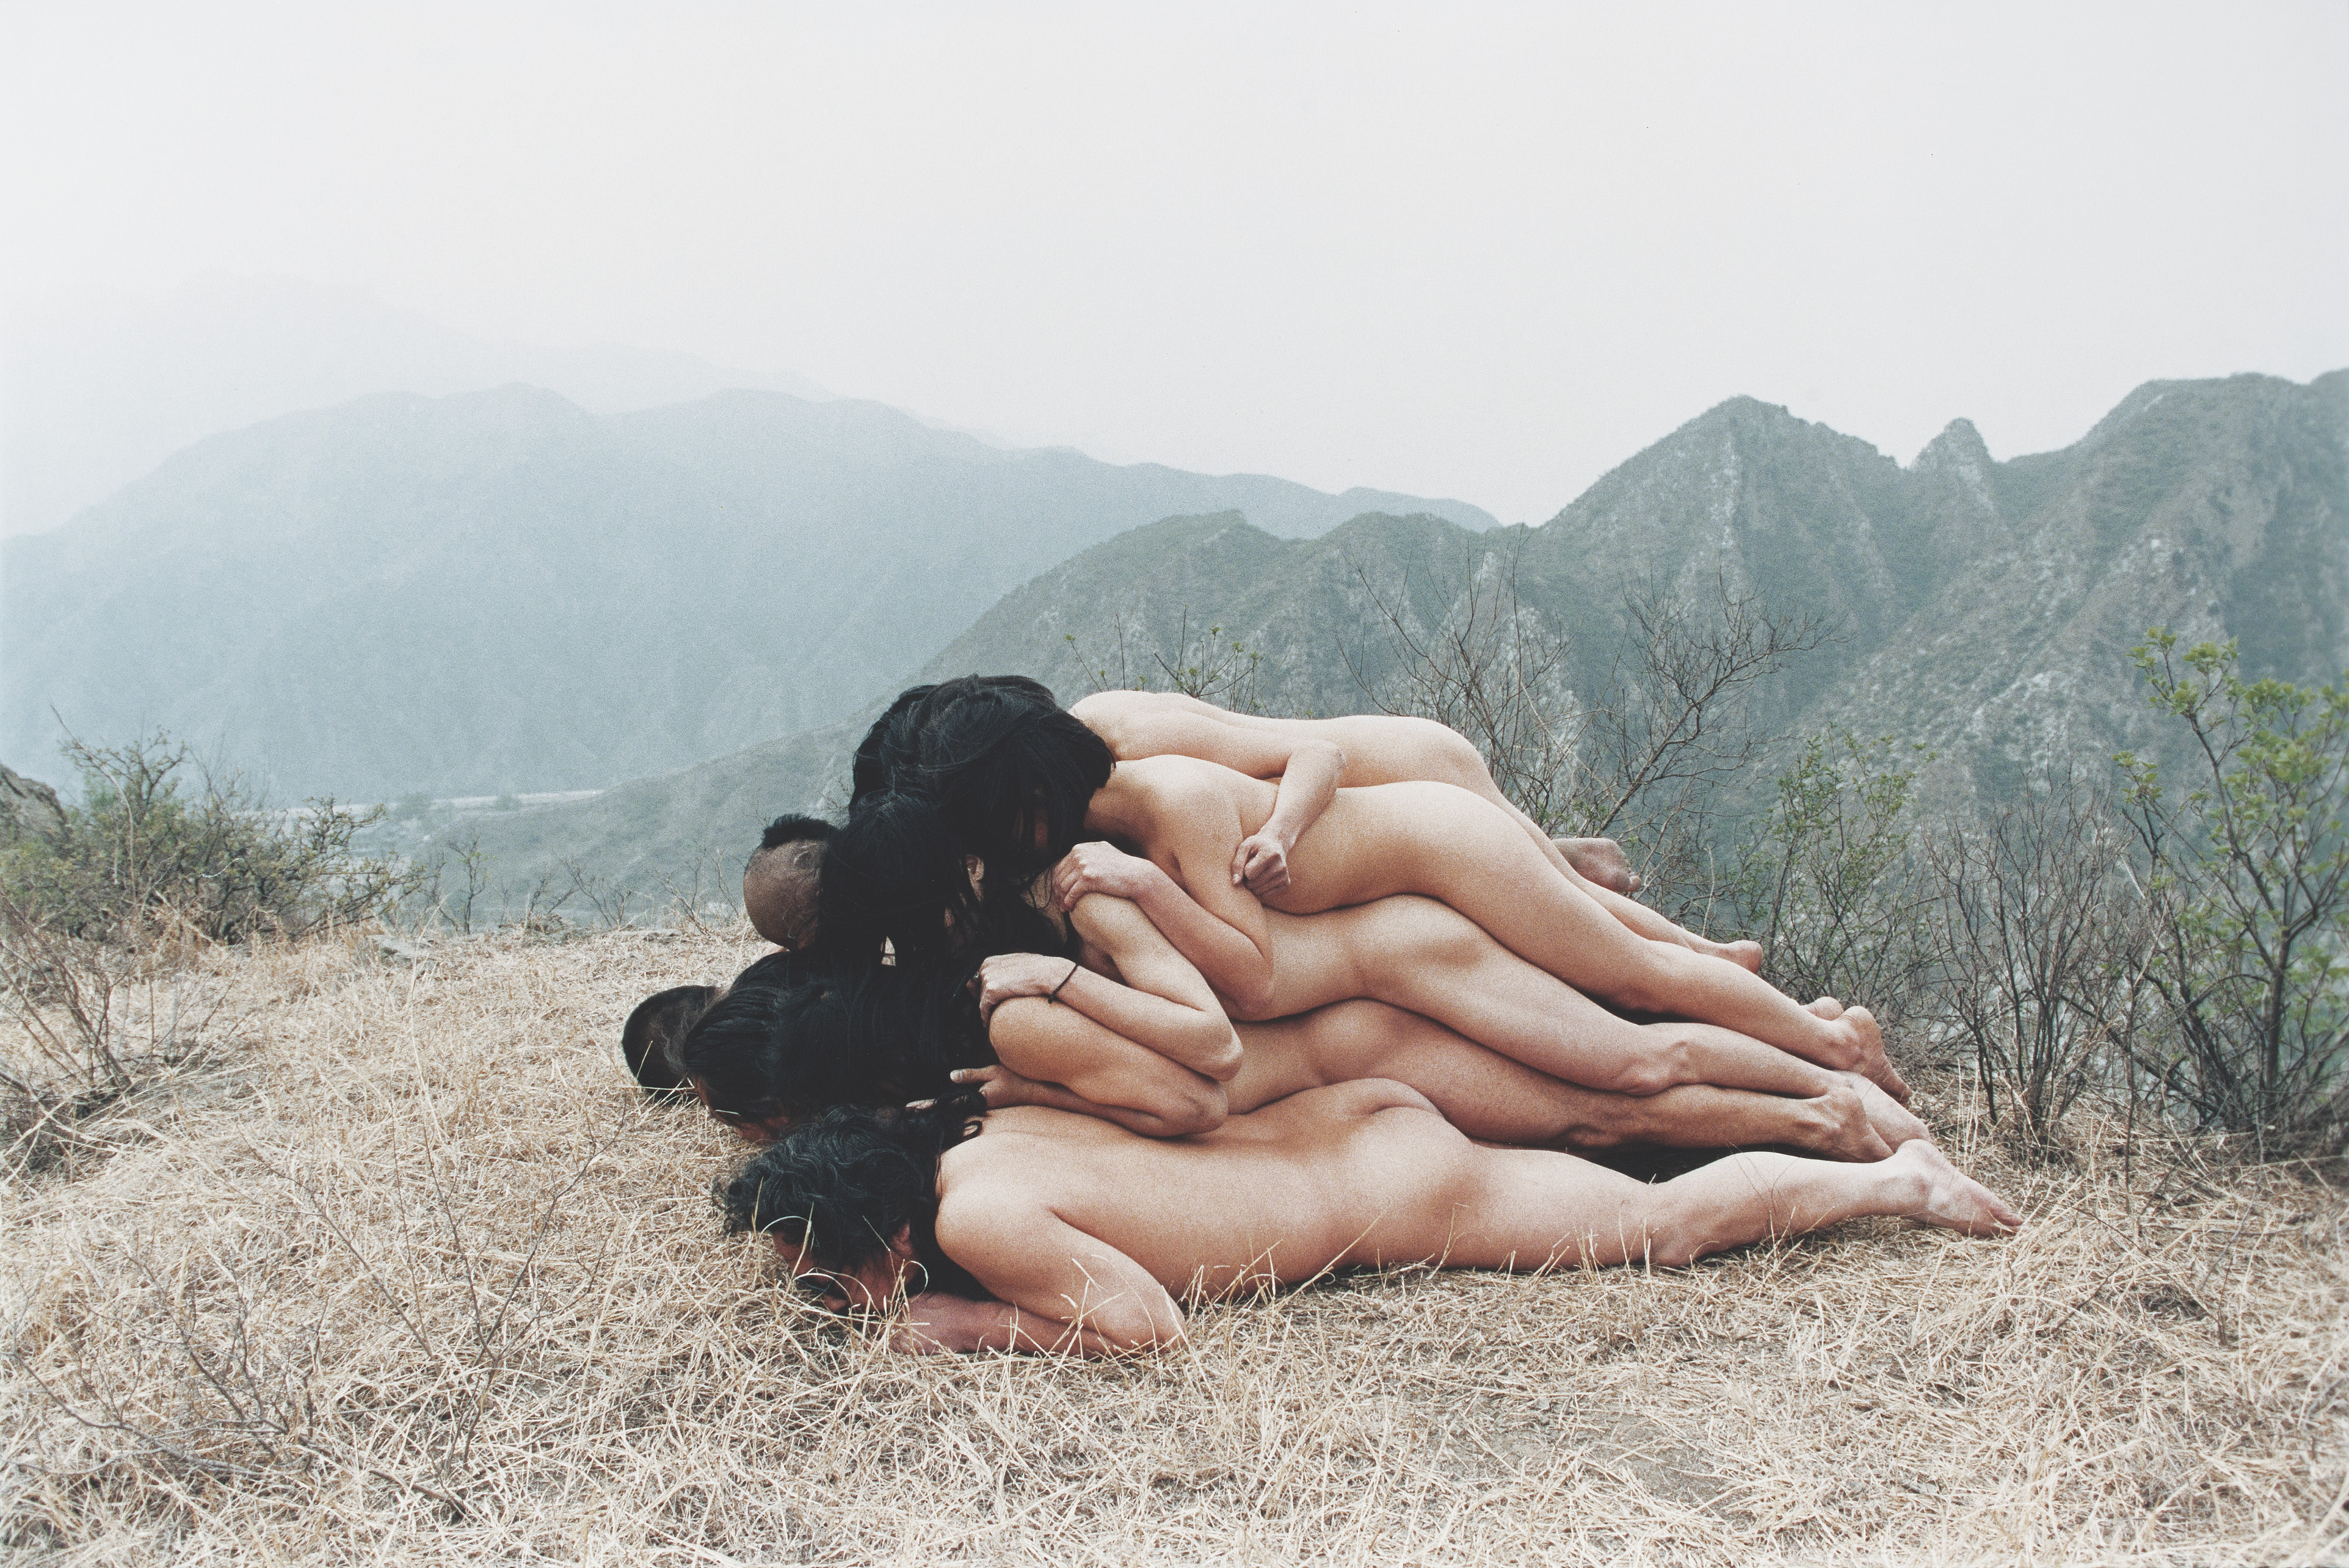 Zhang-Huan-To-Add-a-Meter-to-an-Anonymous-Mountain-1995-chromogenic-print-114.3-x-165.7-cm.-45-x-65-14-in.-edition-15-.jpg